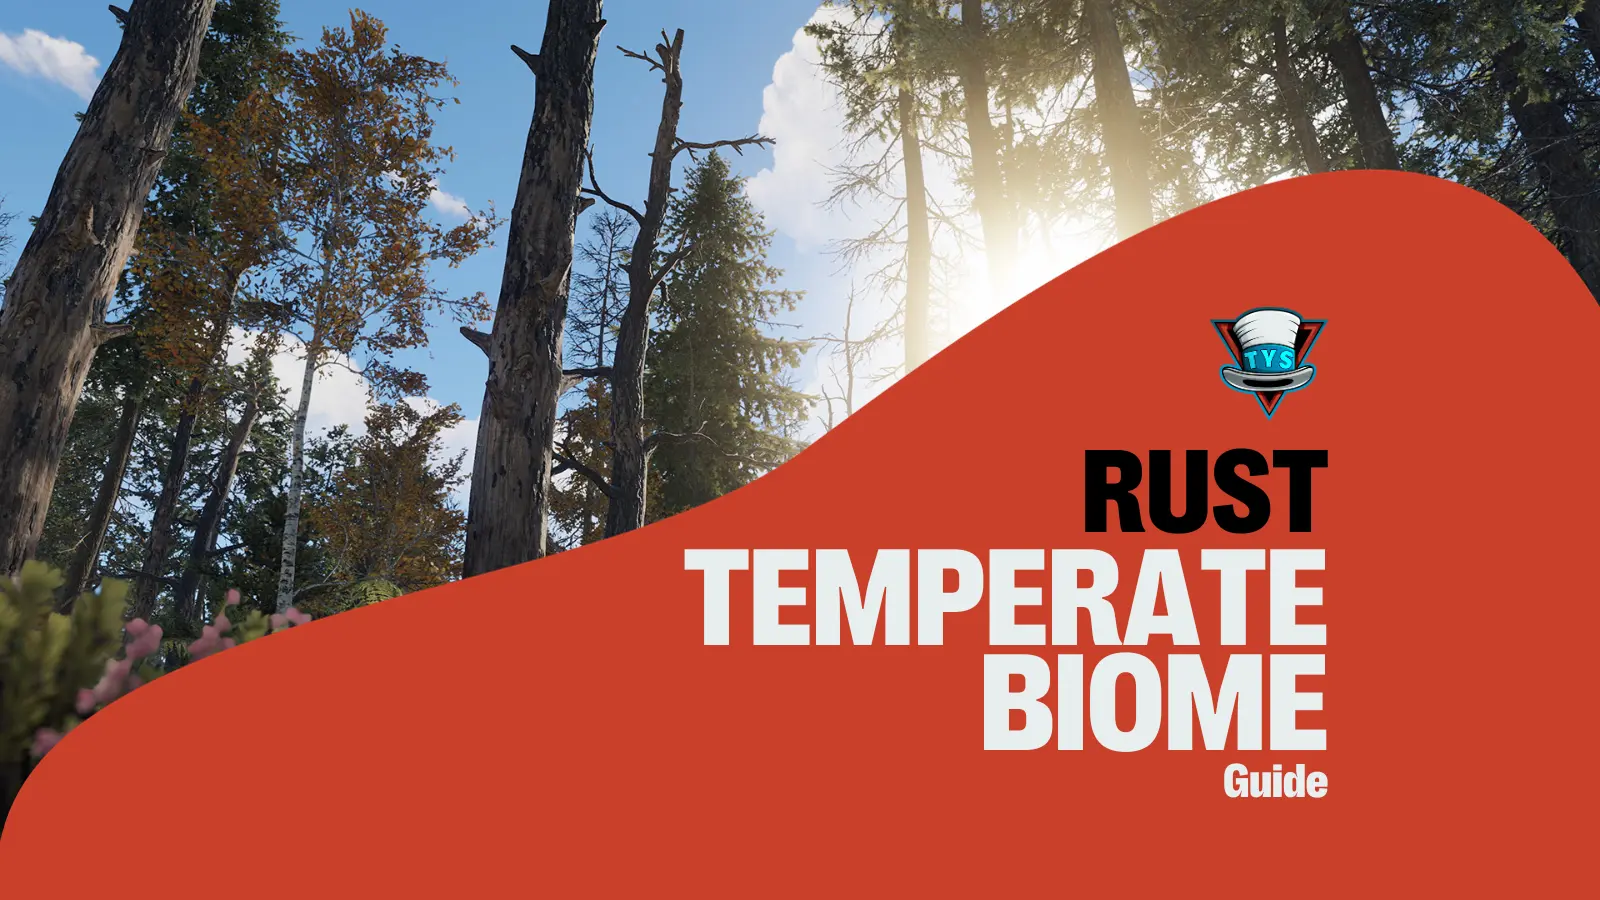 The Rust Temperate Biome: A Verdant Playground for Survivors